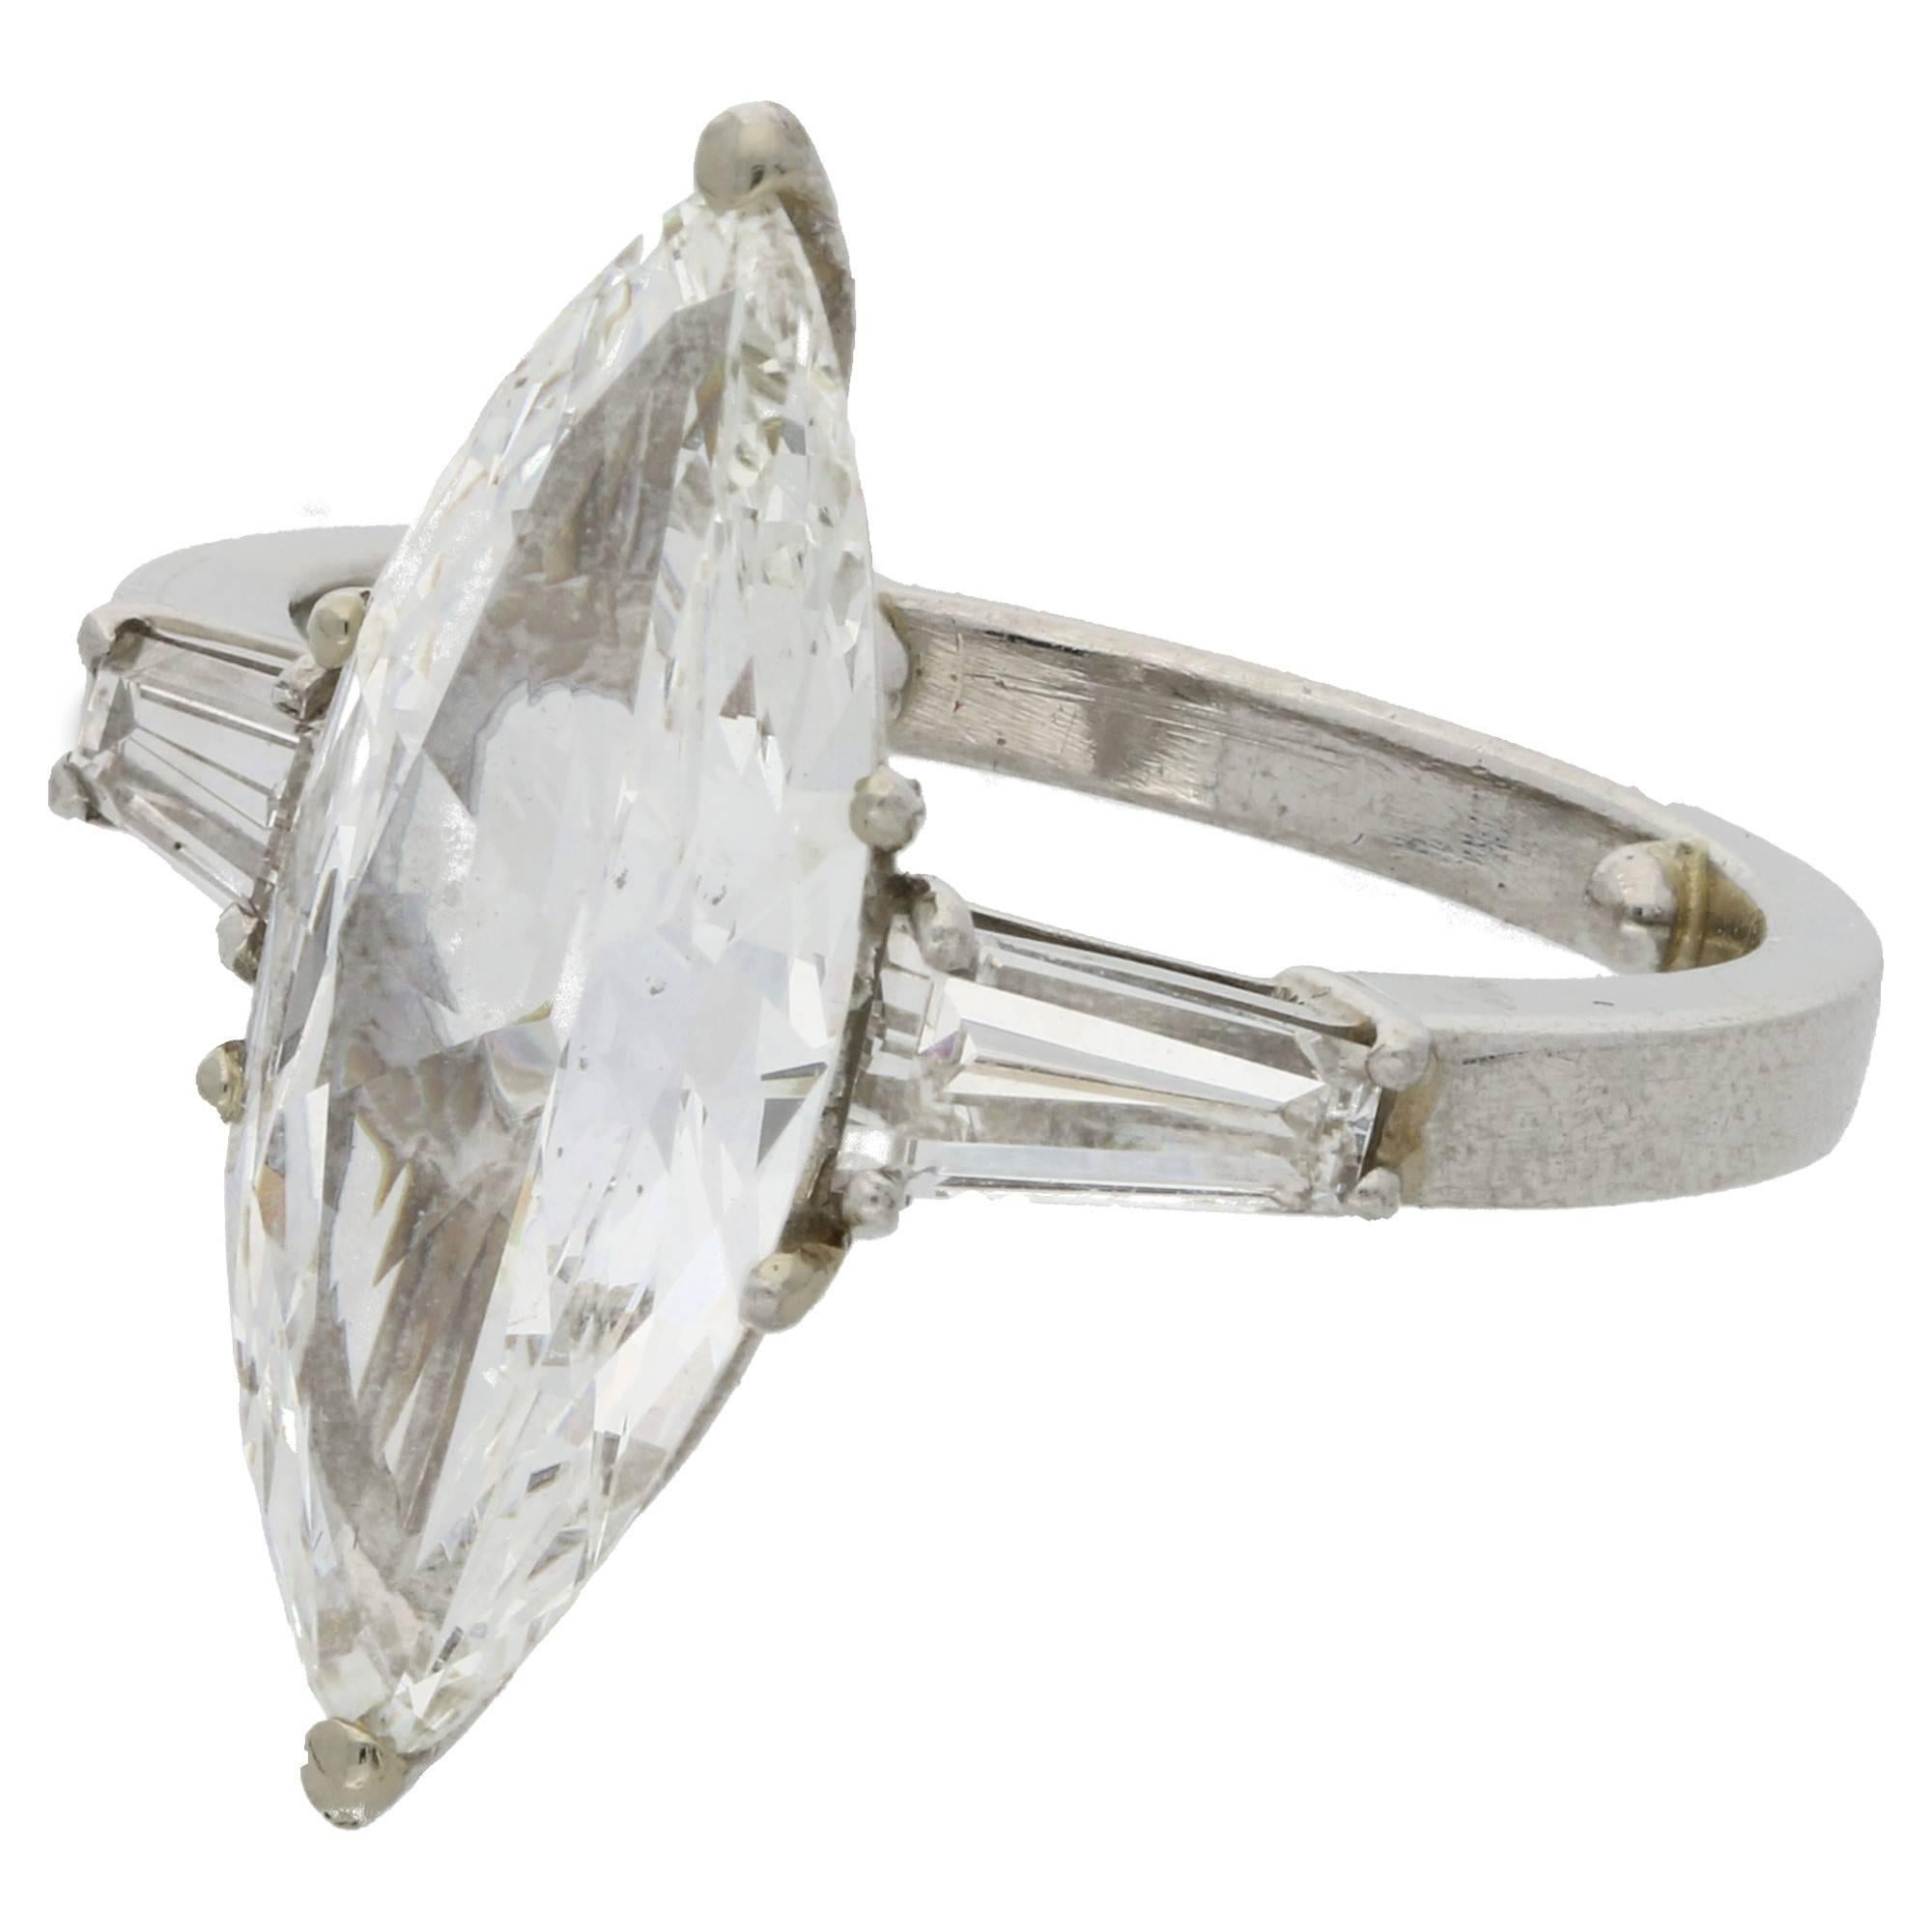 A beautiful marquise shaped diamond ring set in platinum.  The central marquise shaped diamond is independently certified as 3.26cts and graded as a rare white, G colour and VS clarity.  It is flanked by tapering baguettes each side which flow into